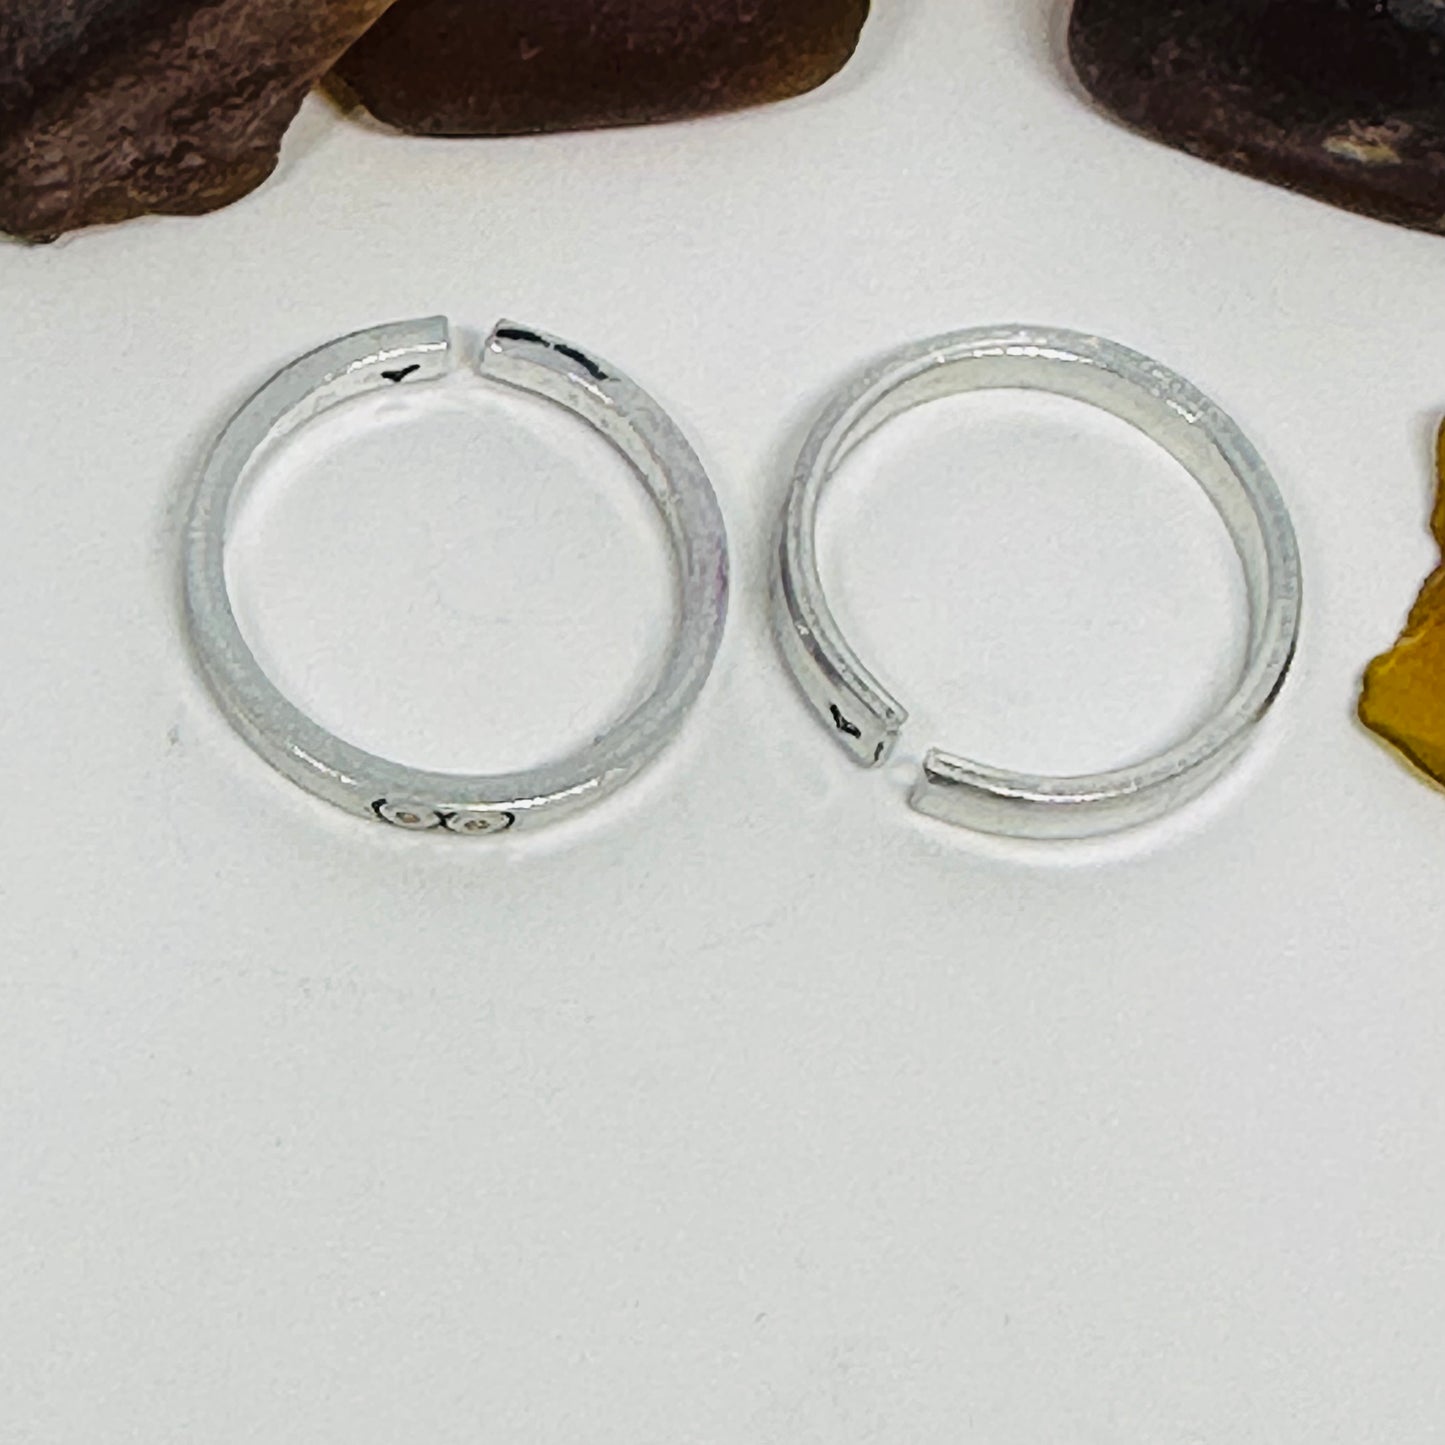 Boobs Design Mini Stacking Adult Ring | Statement Ring | Stamped Metal Boobies Ring | Stacking Stamped Metal Ring | Stamped Metal Bewbies